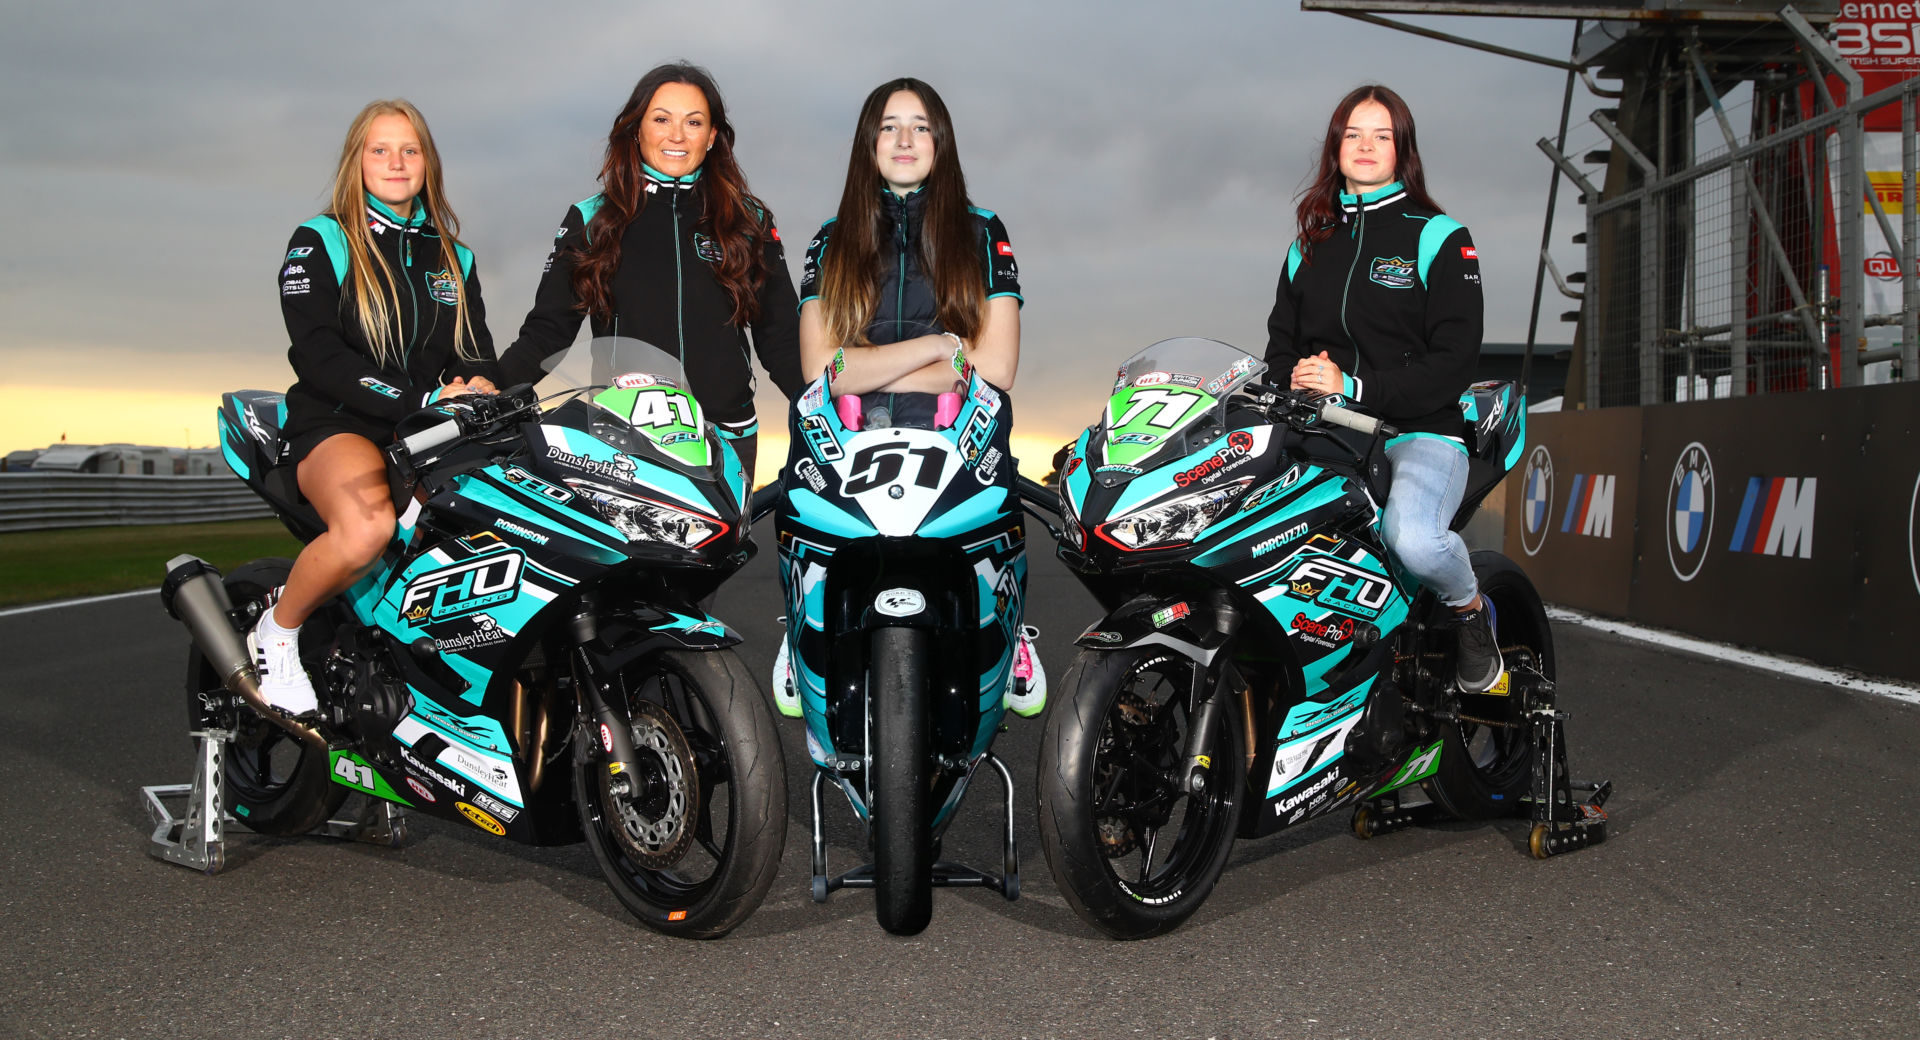 FHO Racing Team Owner Faye Ho (standing) with racers Scarlett Robinson (41), Holly Harris (51) and Charlotte Marcuzzo (71). Photo courtesy FHO Racing.